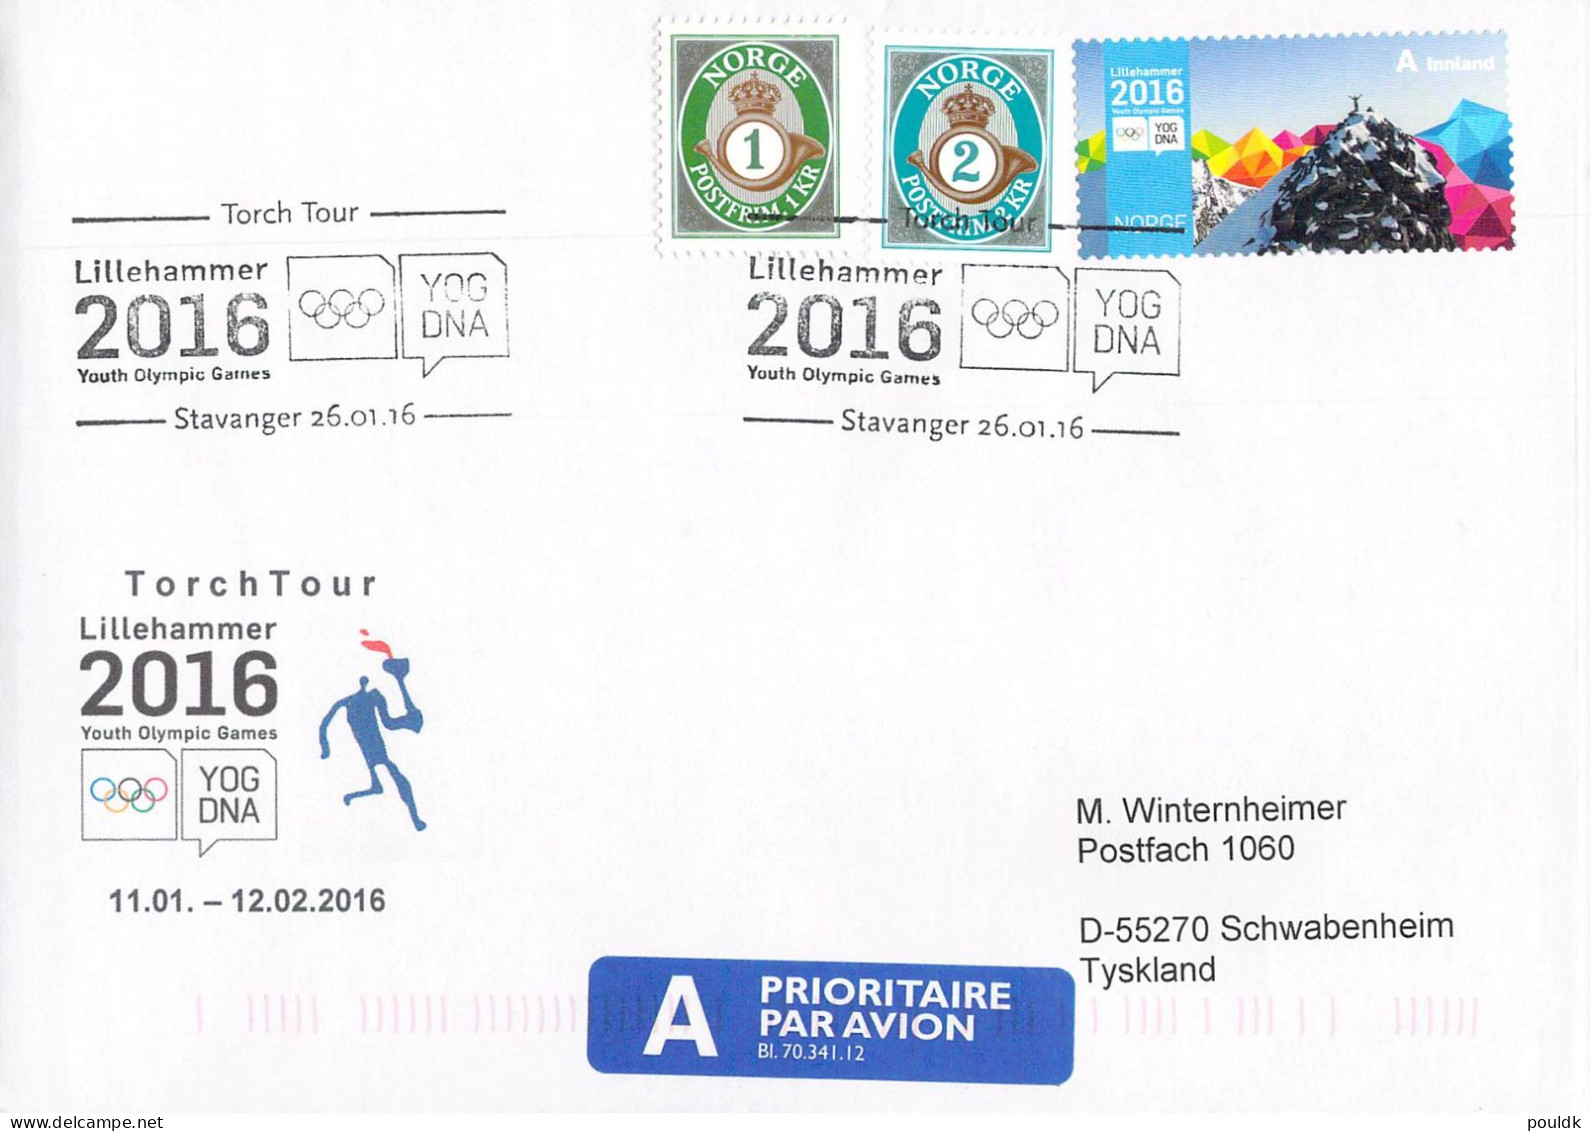 Youth Olympic Games in Lillehammer 2016. 11 Torch Relay Covers from Norway. Postal Weight 0,09 kg. Please read Sales Con